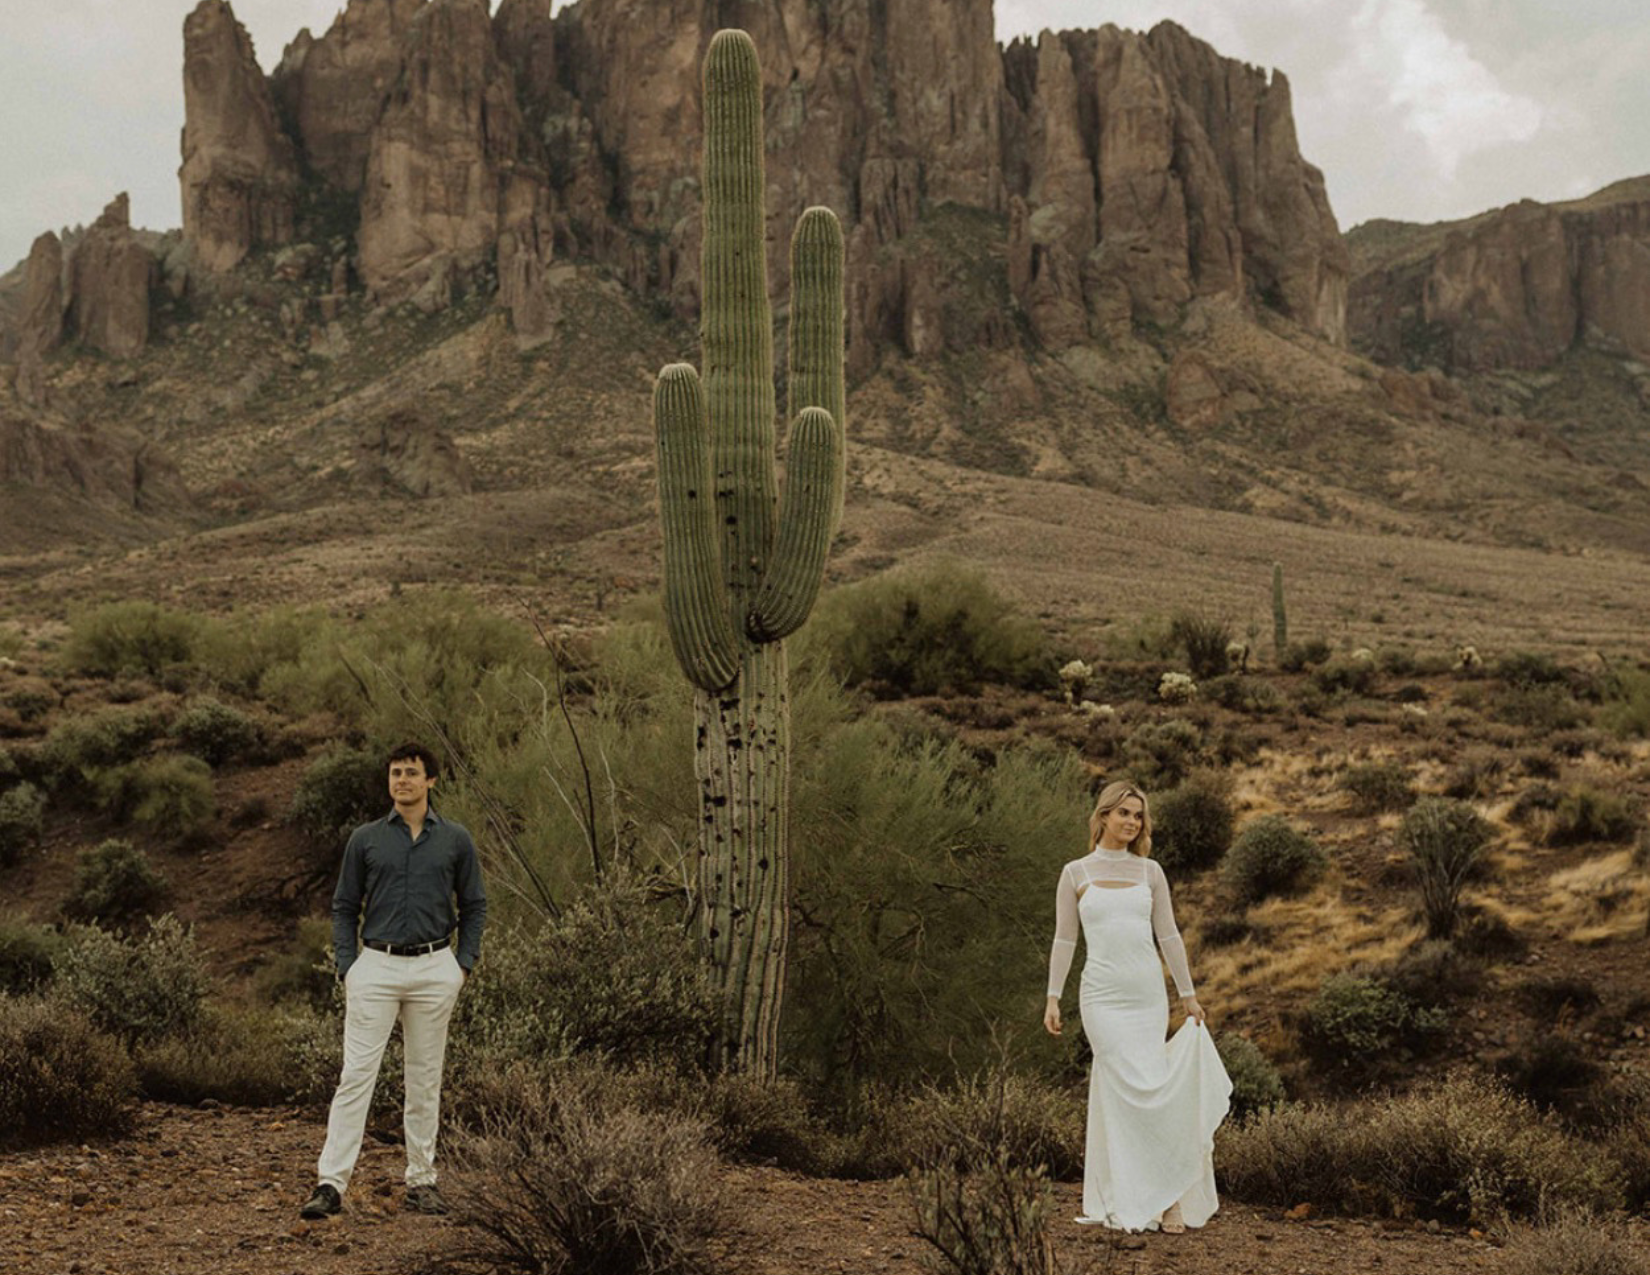 Man and woman stand on either side of large saguaro cactus in front of beautiful mountain scenery at Lost Dutchman State Park